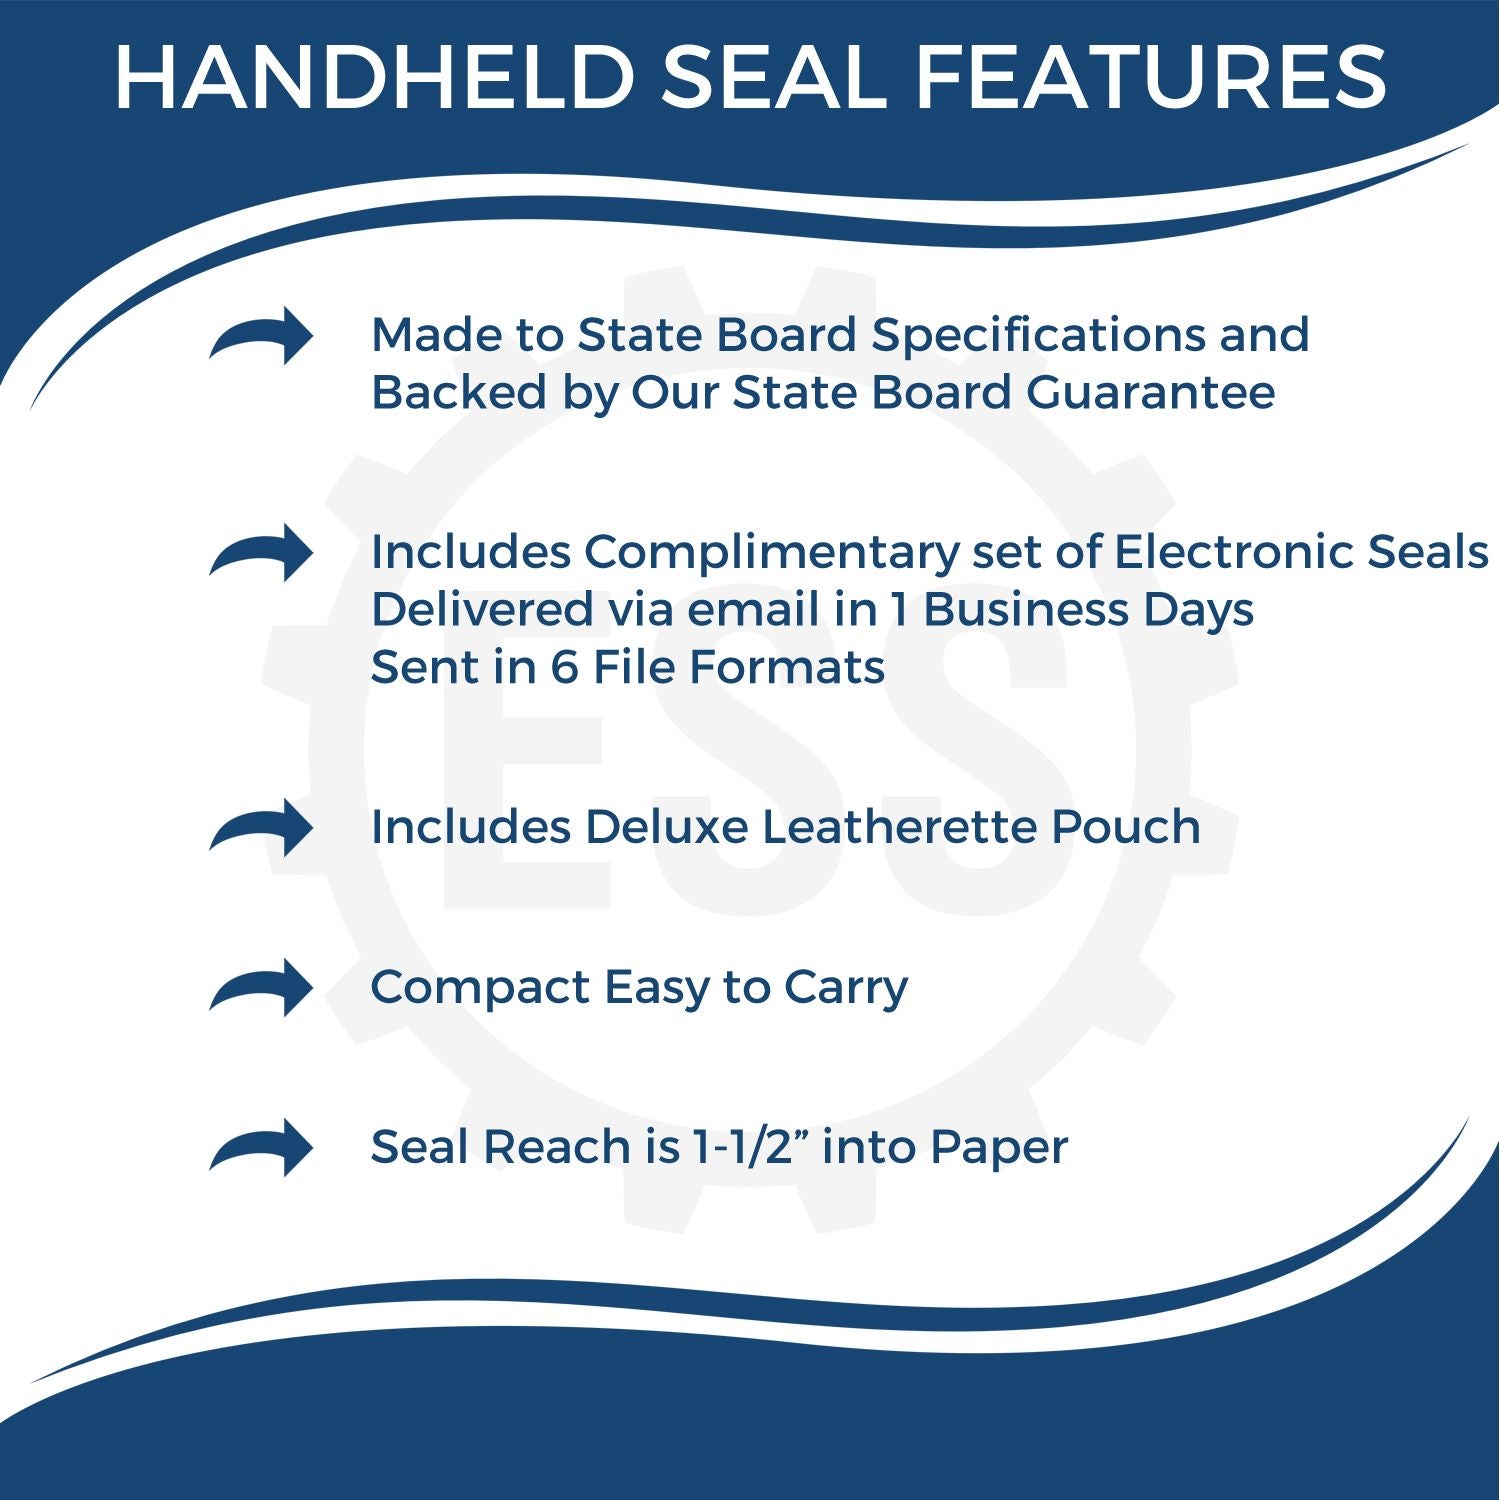 A picture of an infographic highlighting the selling points for the Handheld Oklahoma Land Surveyor Seal